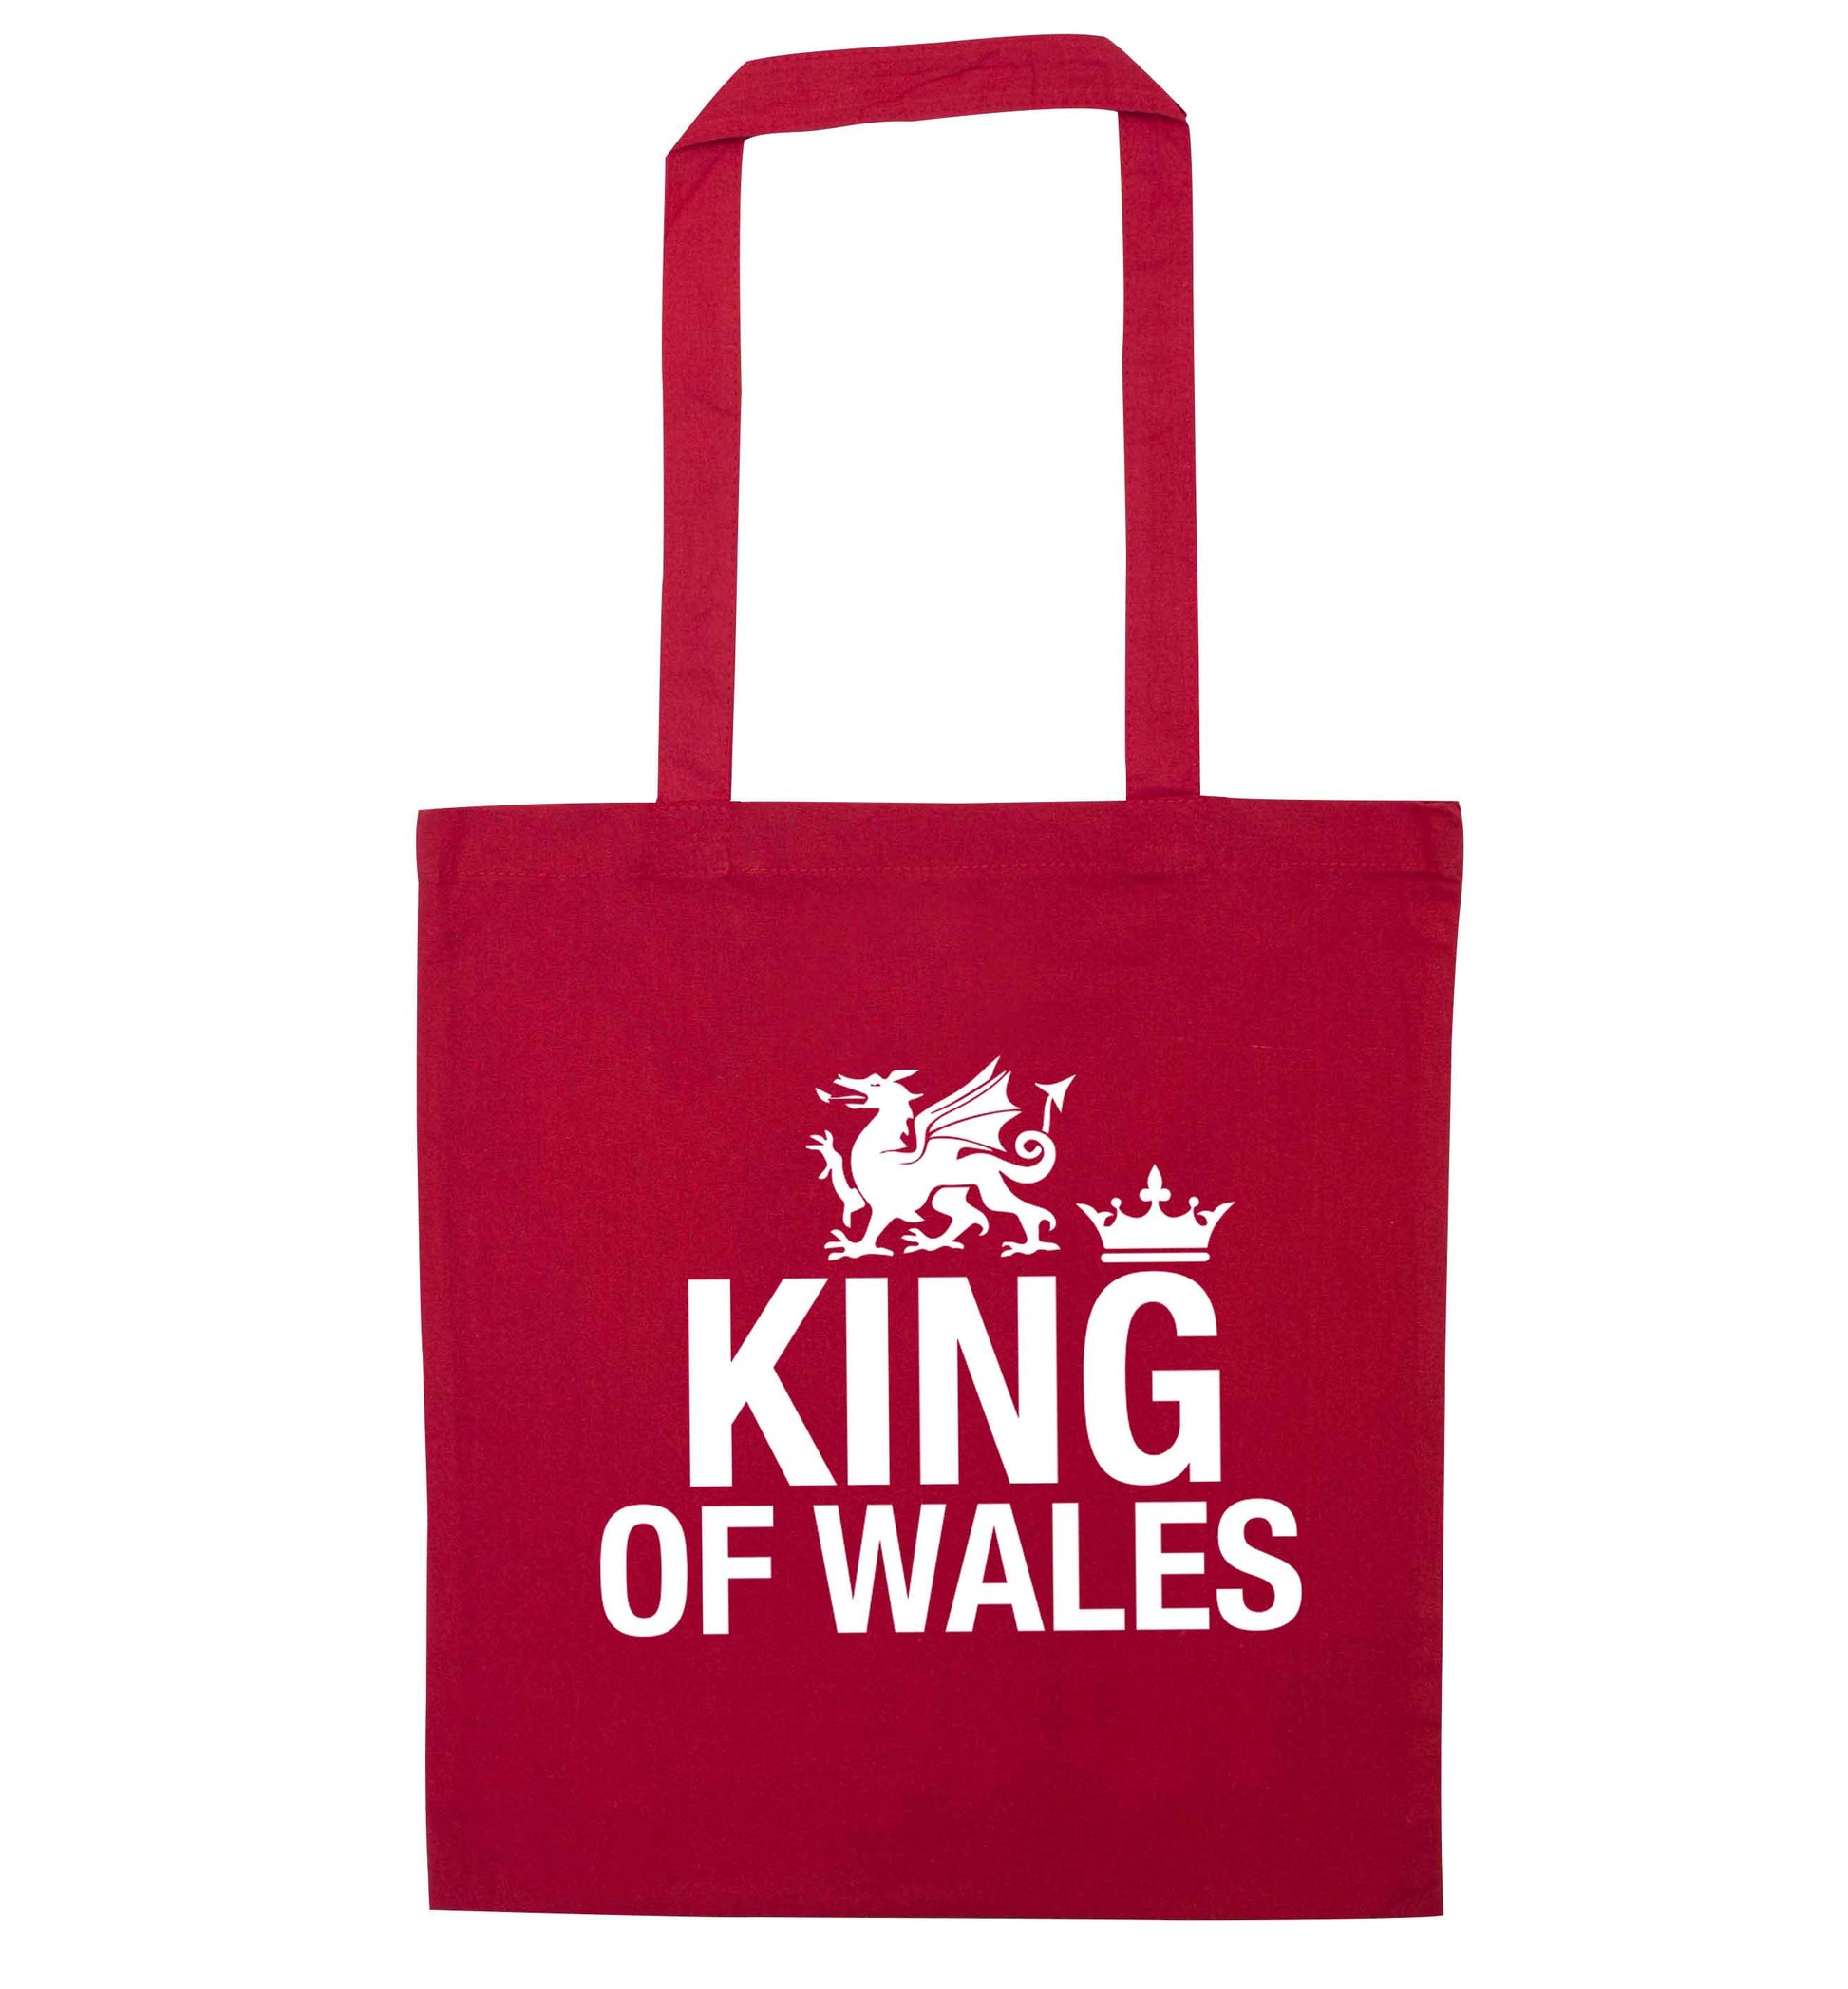 King of Wales red tote bag